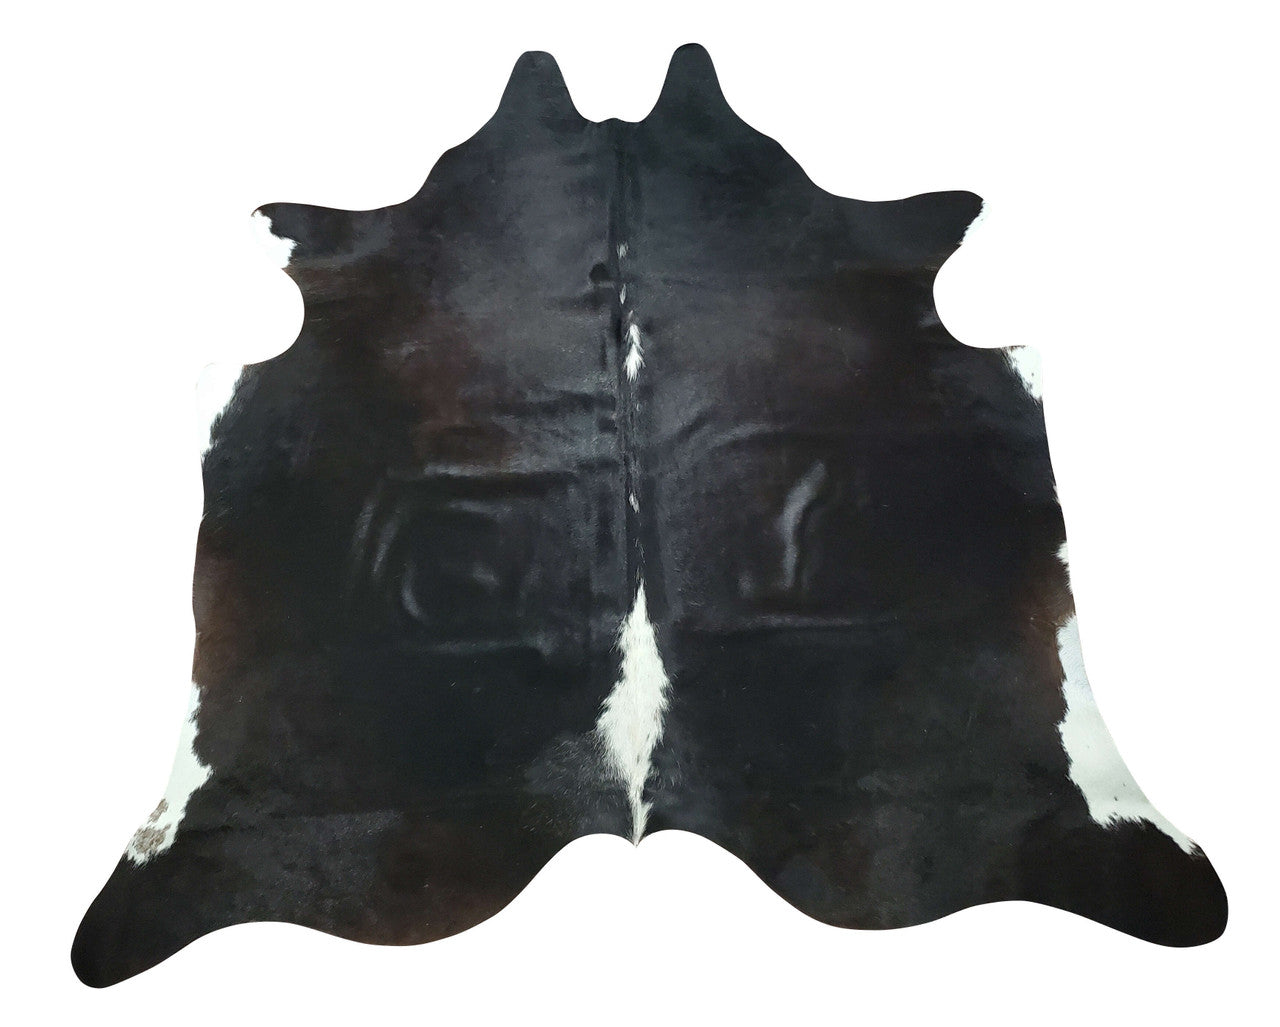 A small black cowhide rug selected for unique style, this will look fabulous in white farmhouse or even a dark lodge